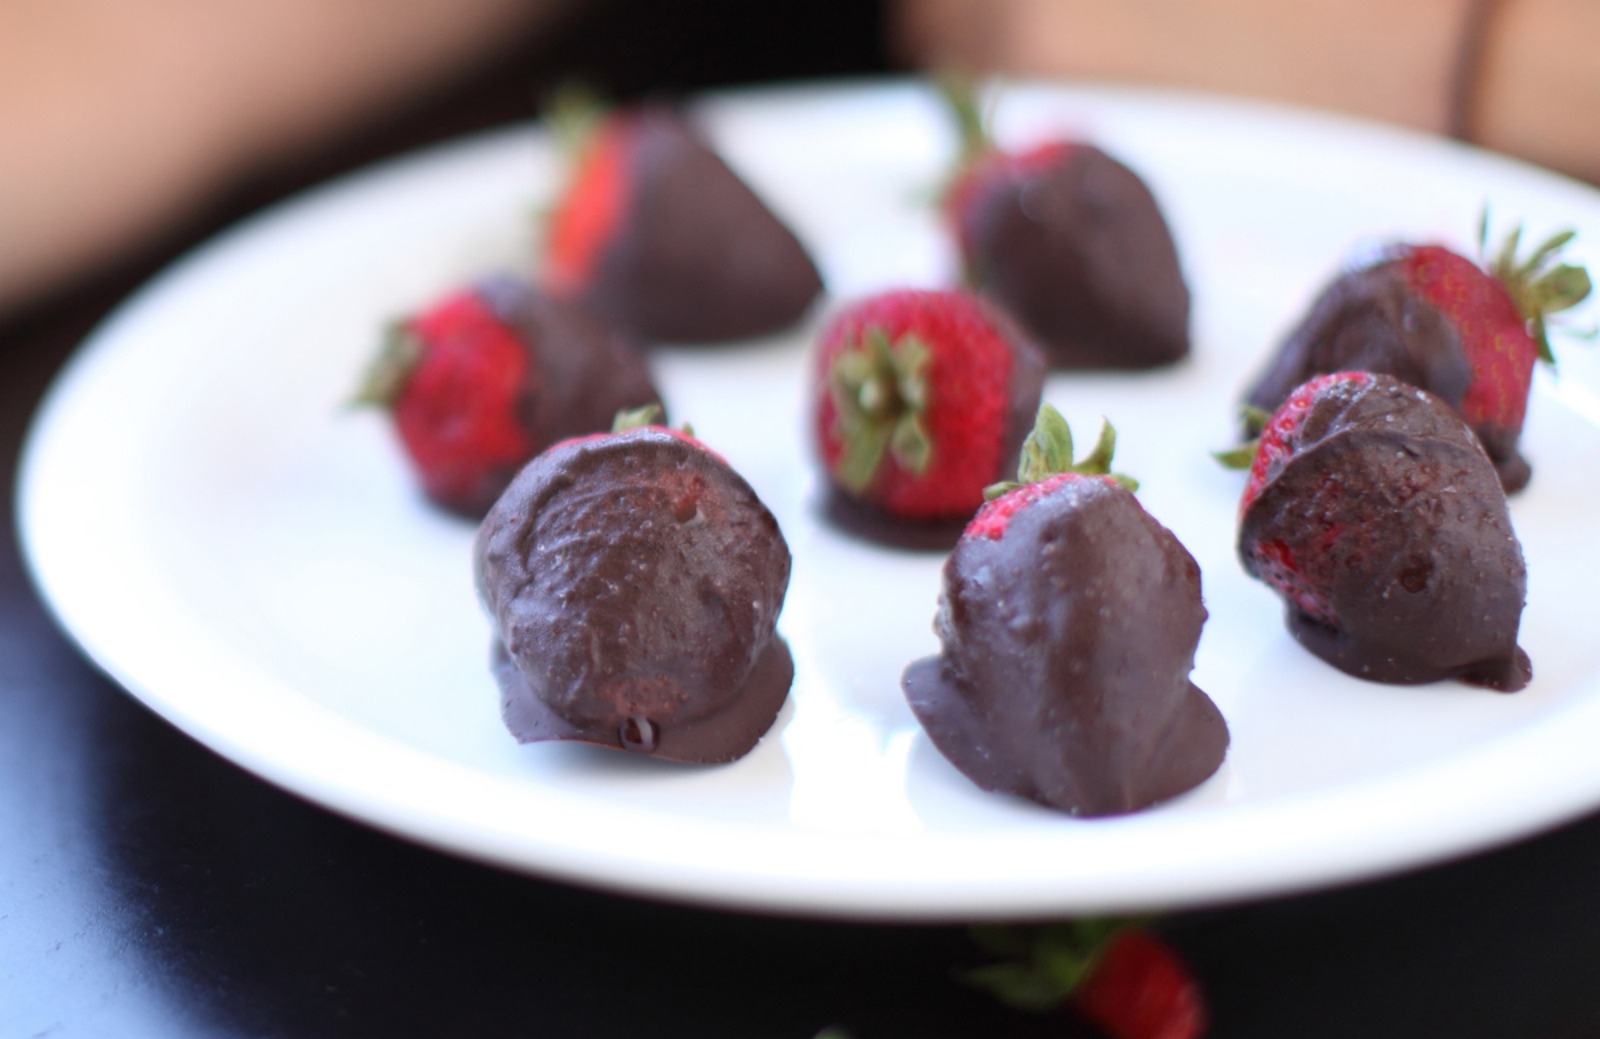 Mexican Hot Chocolate-Covered Strawberries [Vegan]